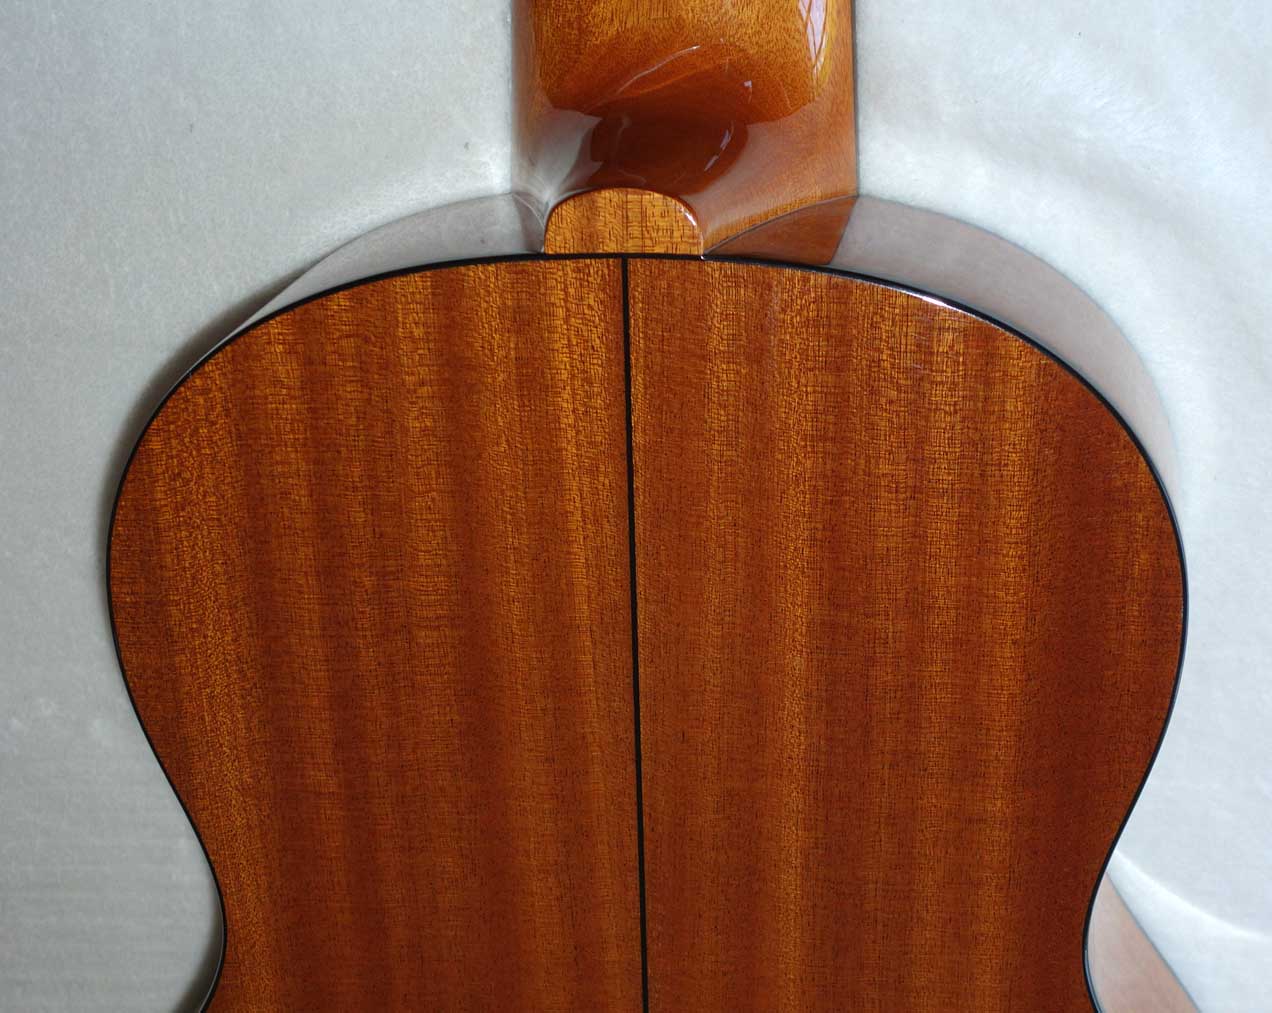 Cathedral Guitar 2015 Model 125 Ten-String Classical Harp Guitar, w/Hardshell Case [Decacorde]